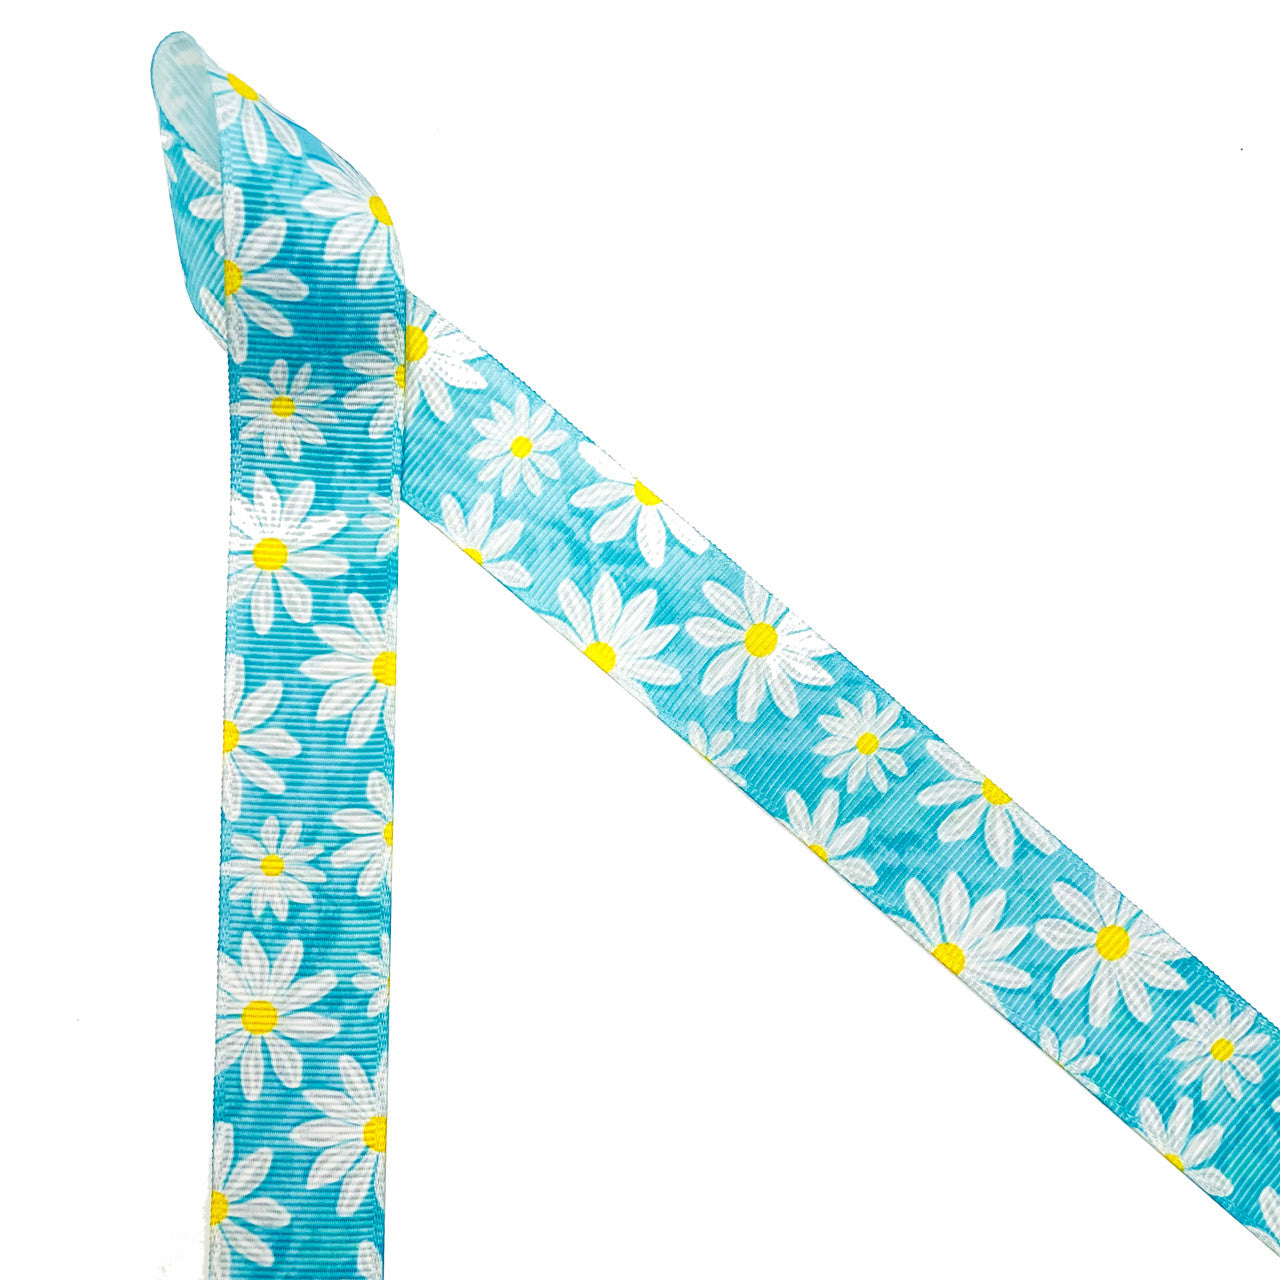 Daisies are the symbol of happiness in Spring and Summer! Daisy blossoms tossed on a blue water color background printed on 7/8" grosgrain ribbon is the perfect ribbon for Spring and Summer crafting. This is an ideal ribbon for gift wrap, gift baskets, garden parties, bridal showers and Mother's Day. Be sure to have this ribbon on hand for hair bows, head bands, sewing and quilting projects too. All our ribbon is designed and printed in the USA